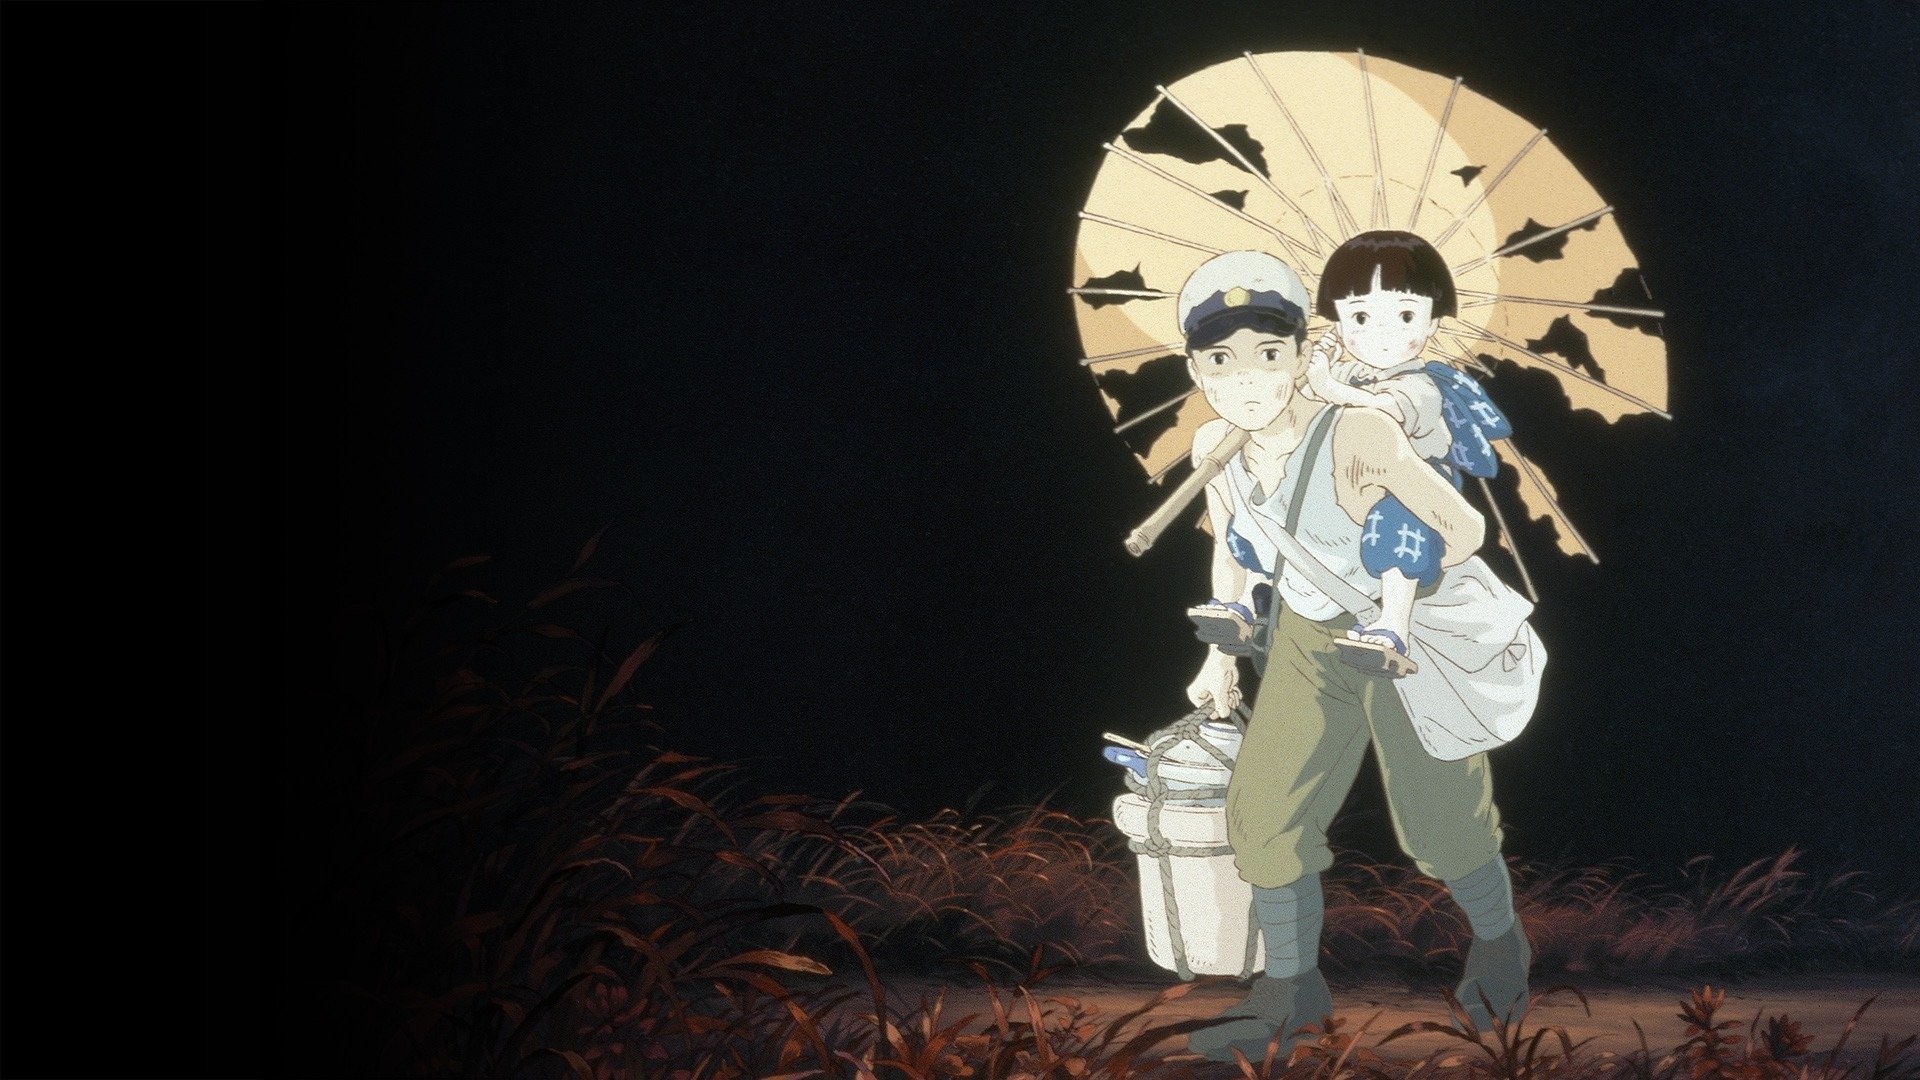 The True Story Behind Grave of the Fireflies